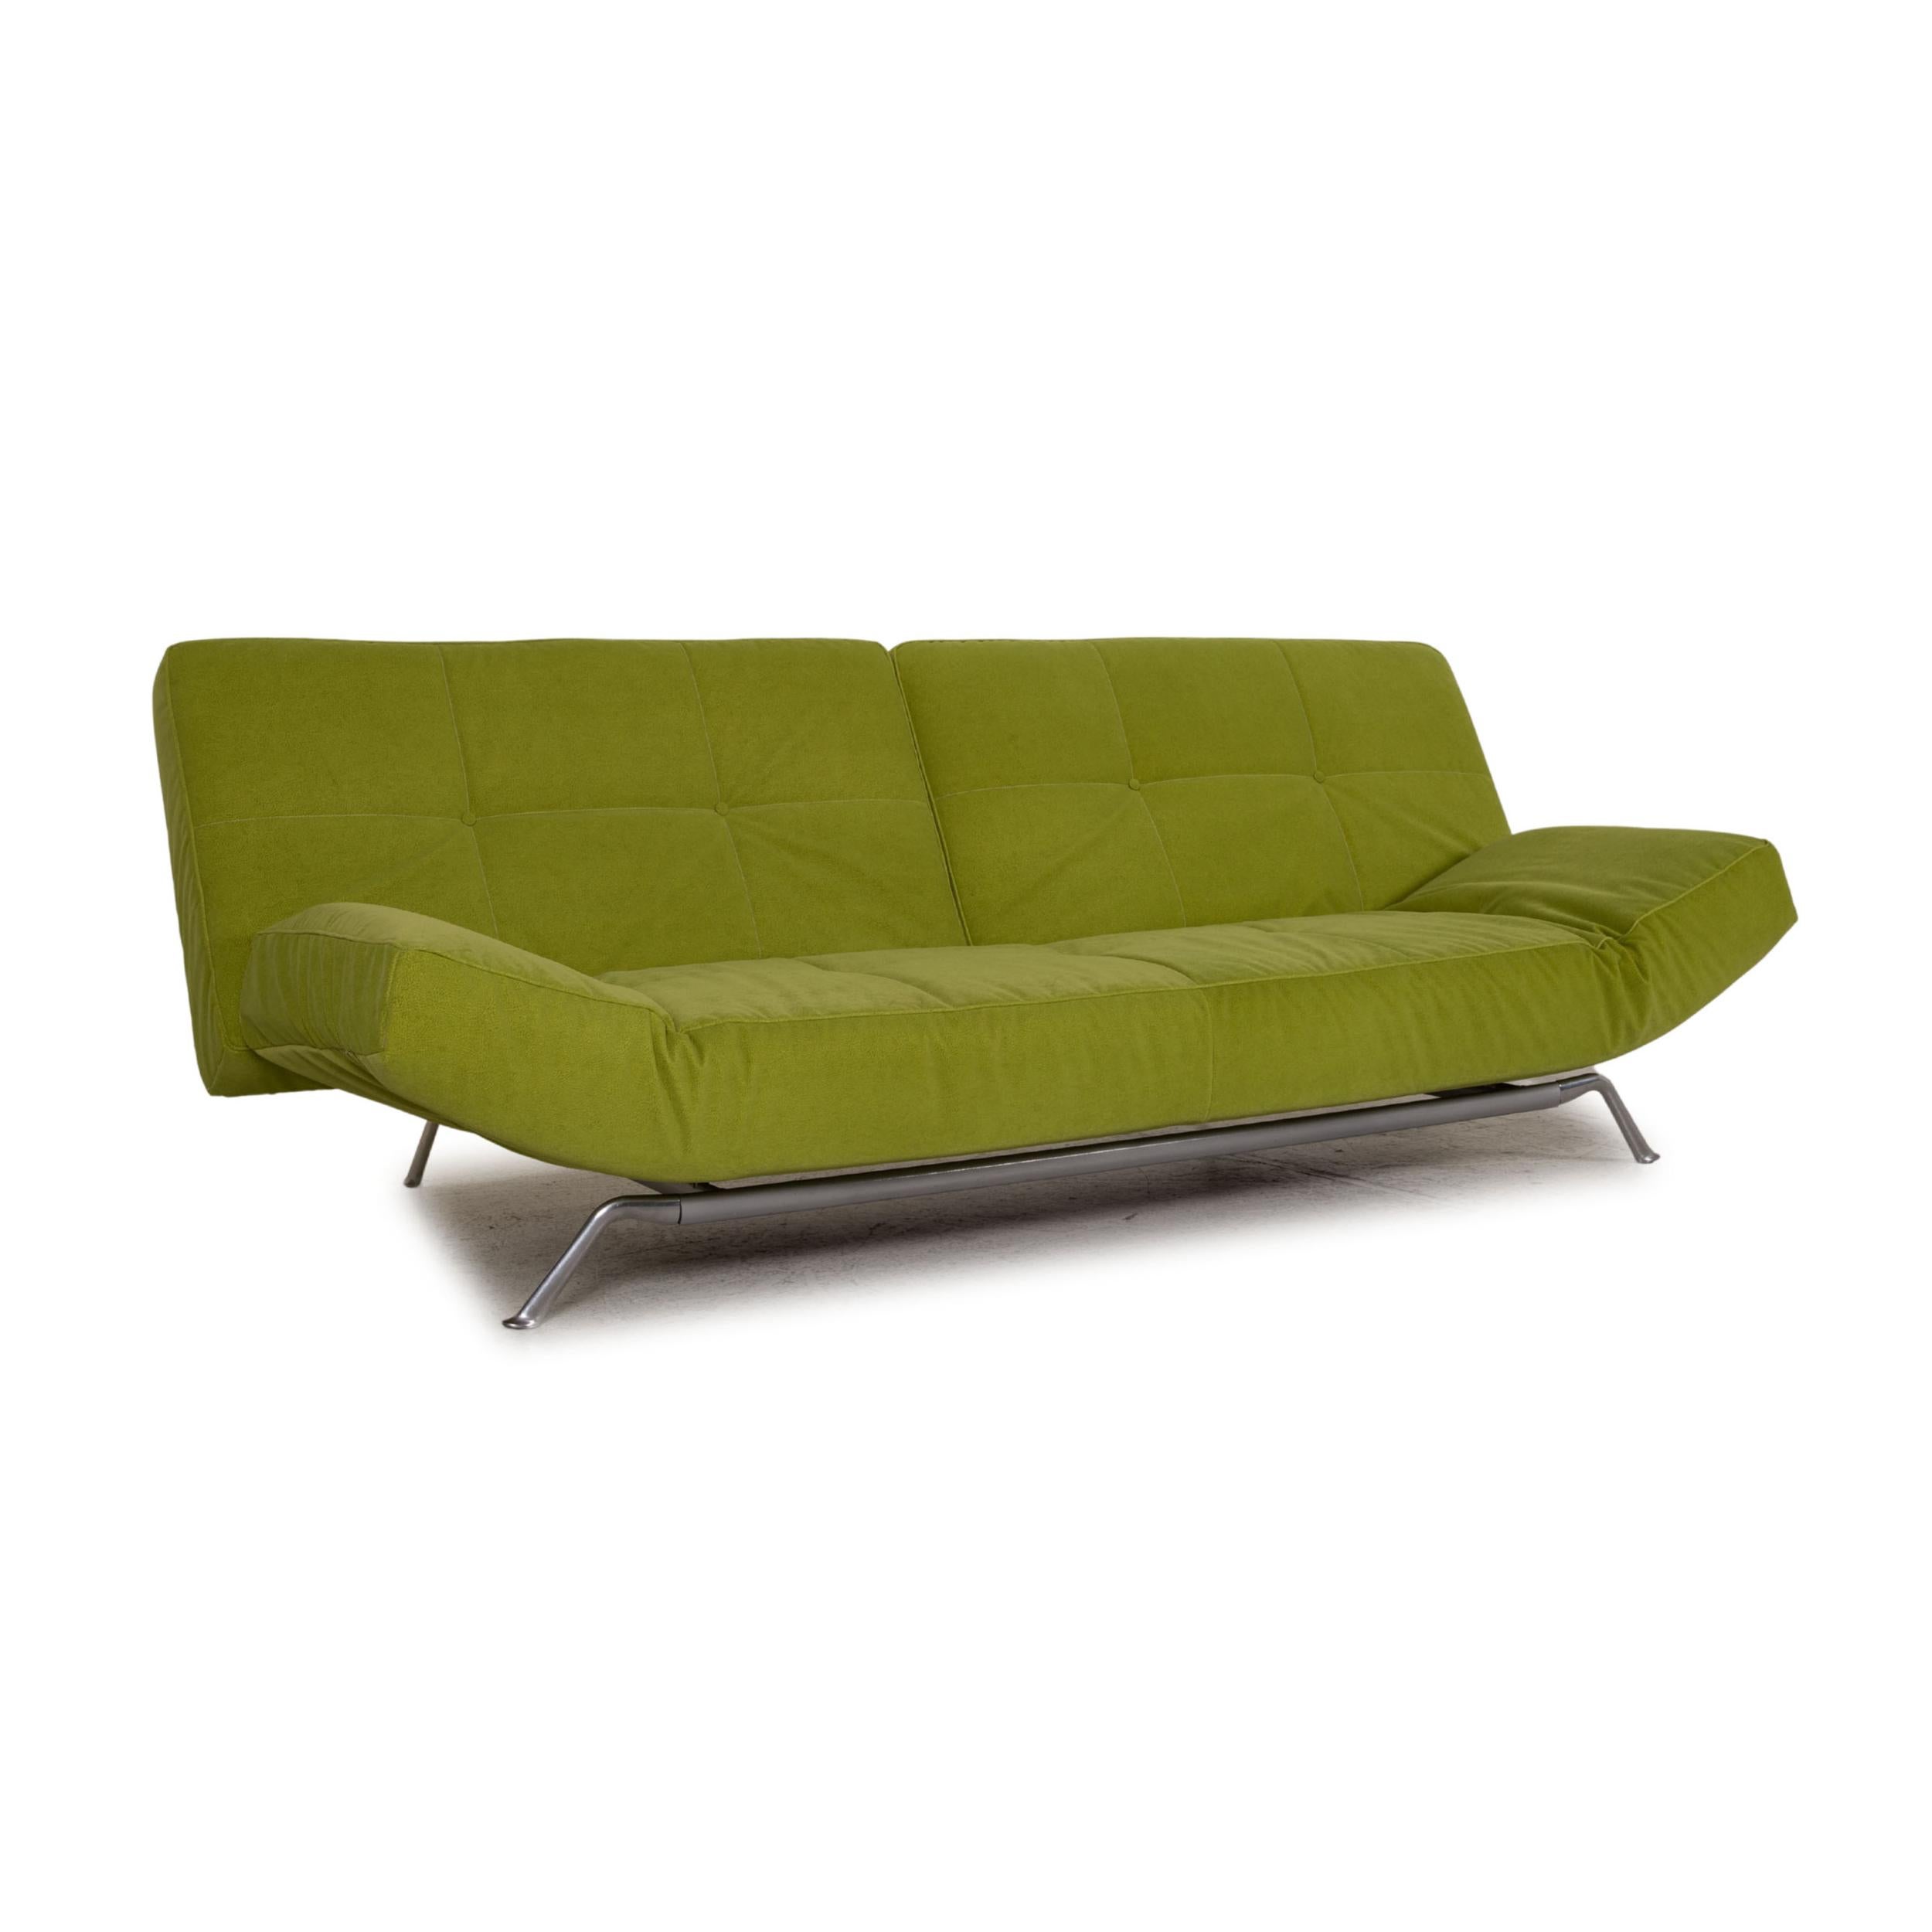 French Ligne Roset Smala Fabric Sofa Green Three-Seater Couch Function Sleeping